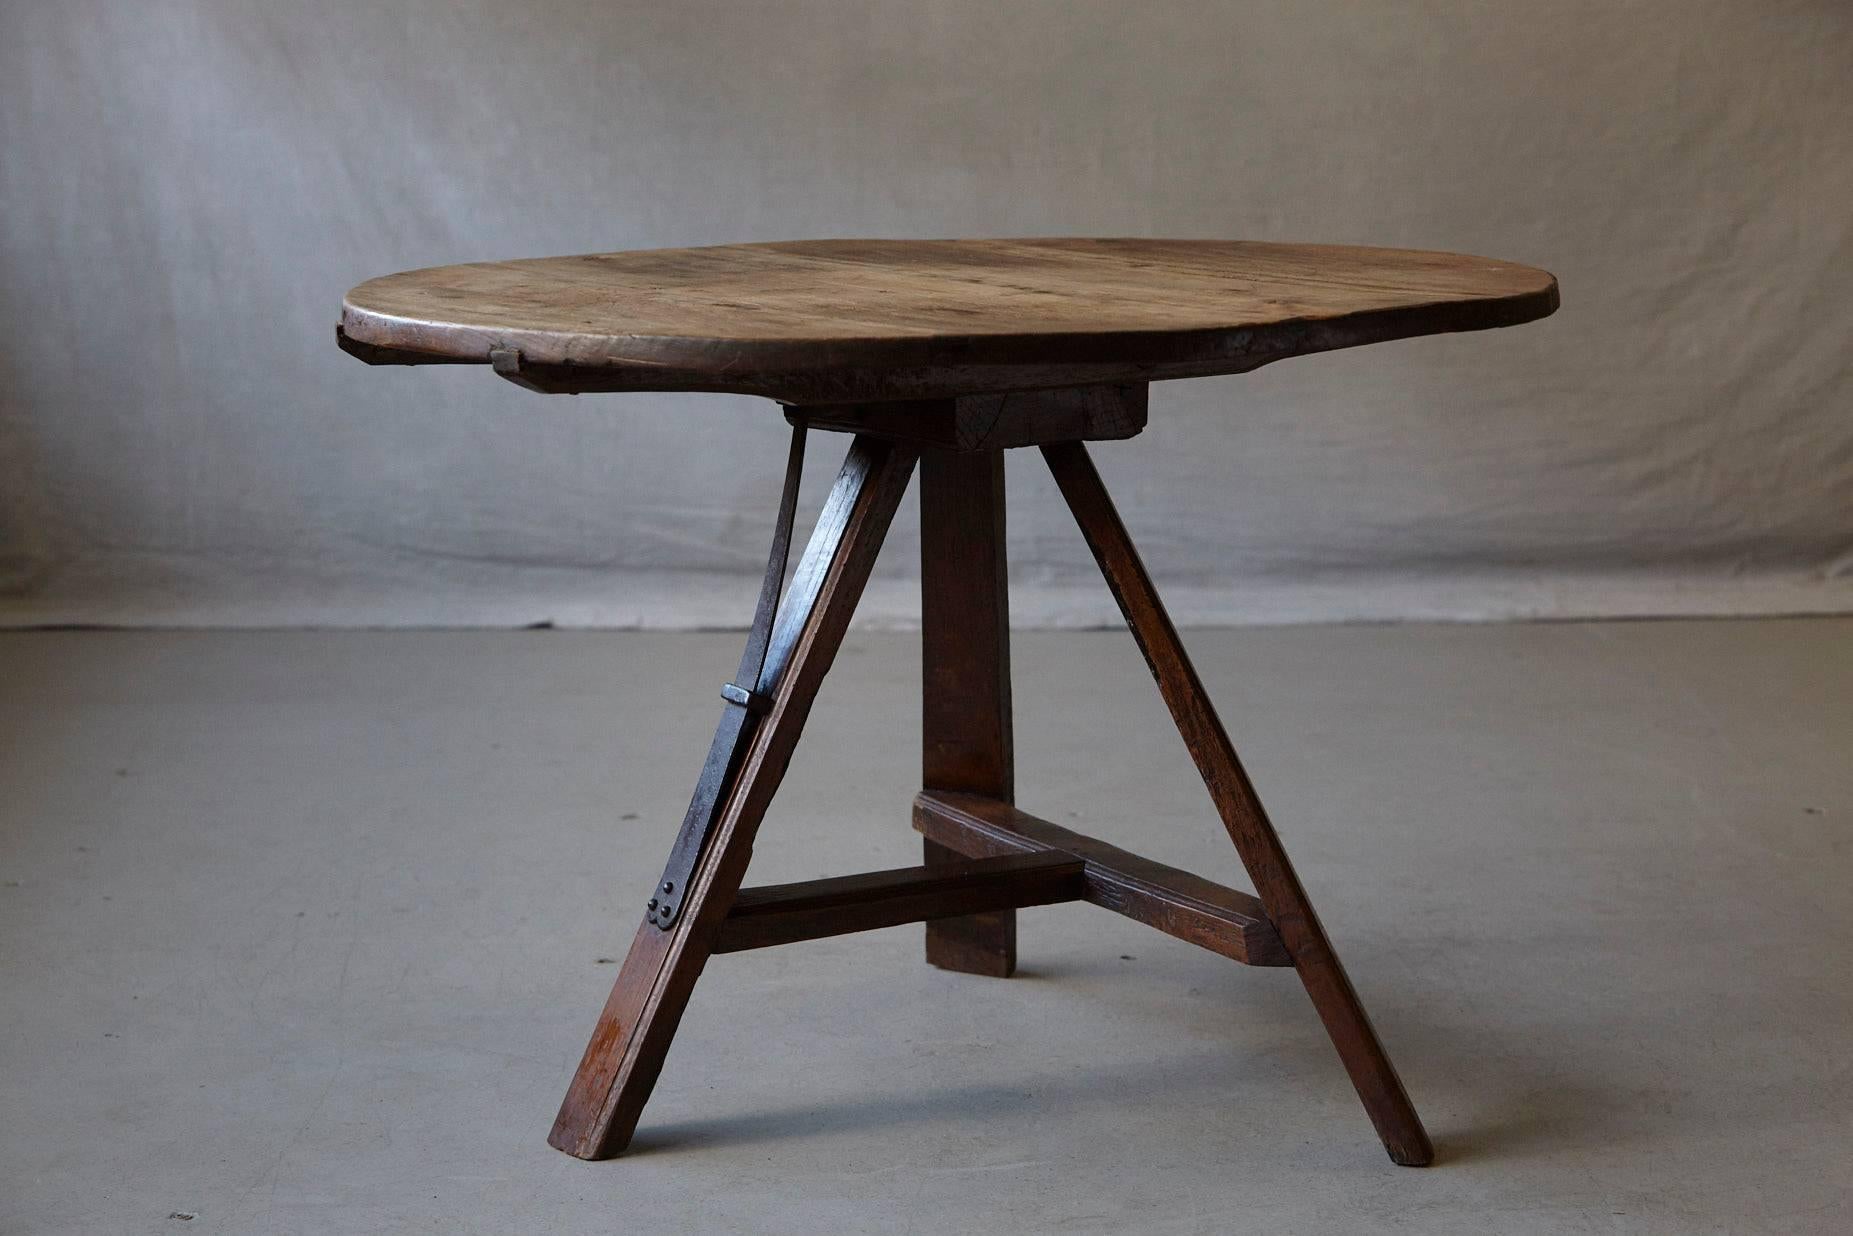 Charming 19th century circular three legged tilt top wine tasting or centre pine table. The tabletop has a nice graining,
the three legged base is sturdy and is equipped with a beautiful wrought iron latch to hold the top in place.
The table can